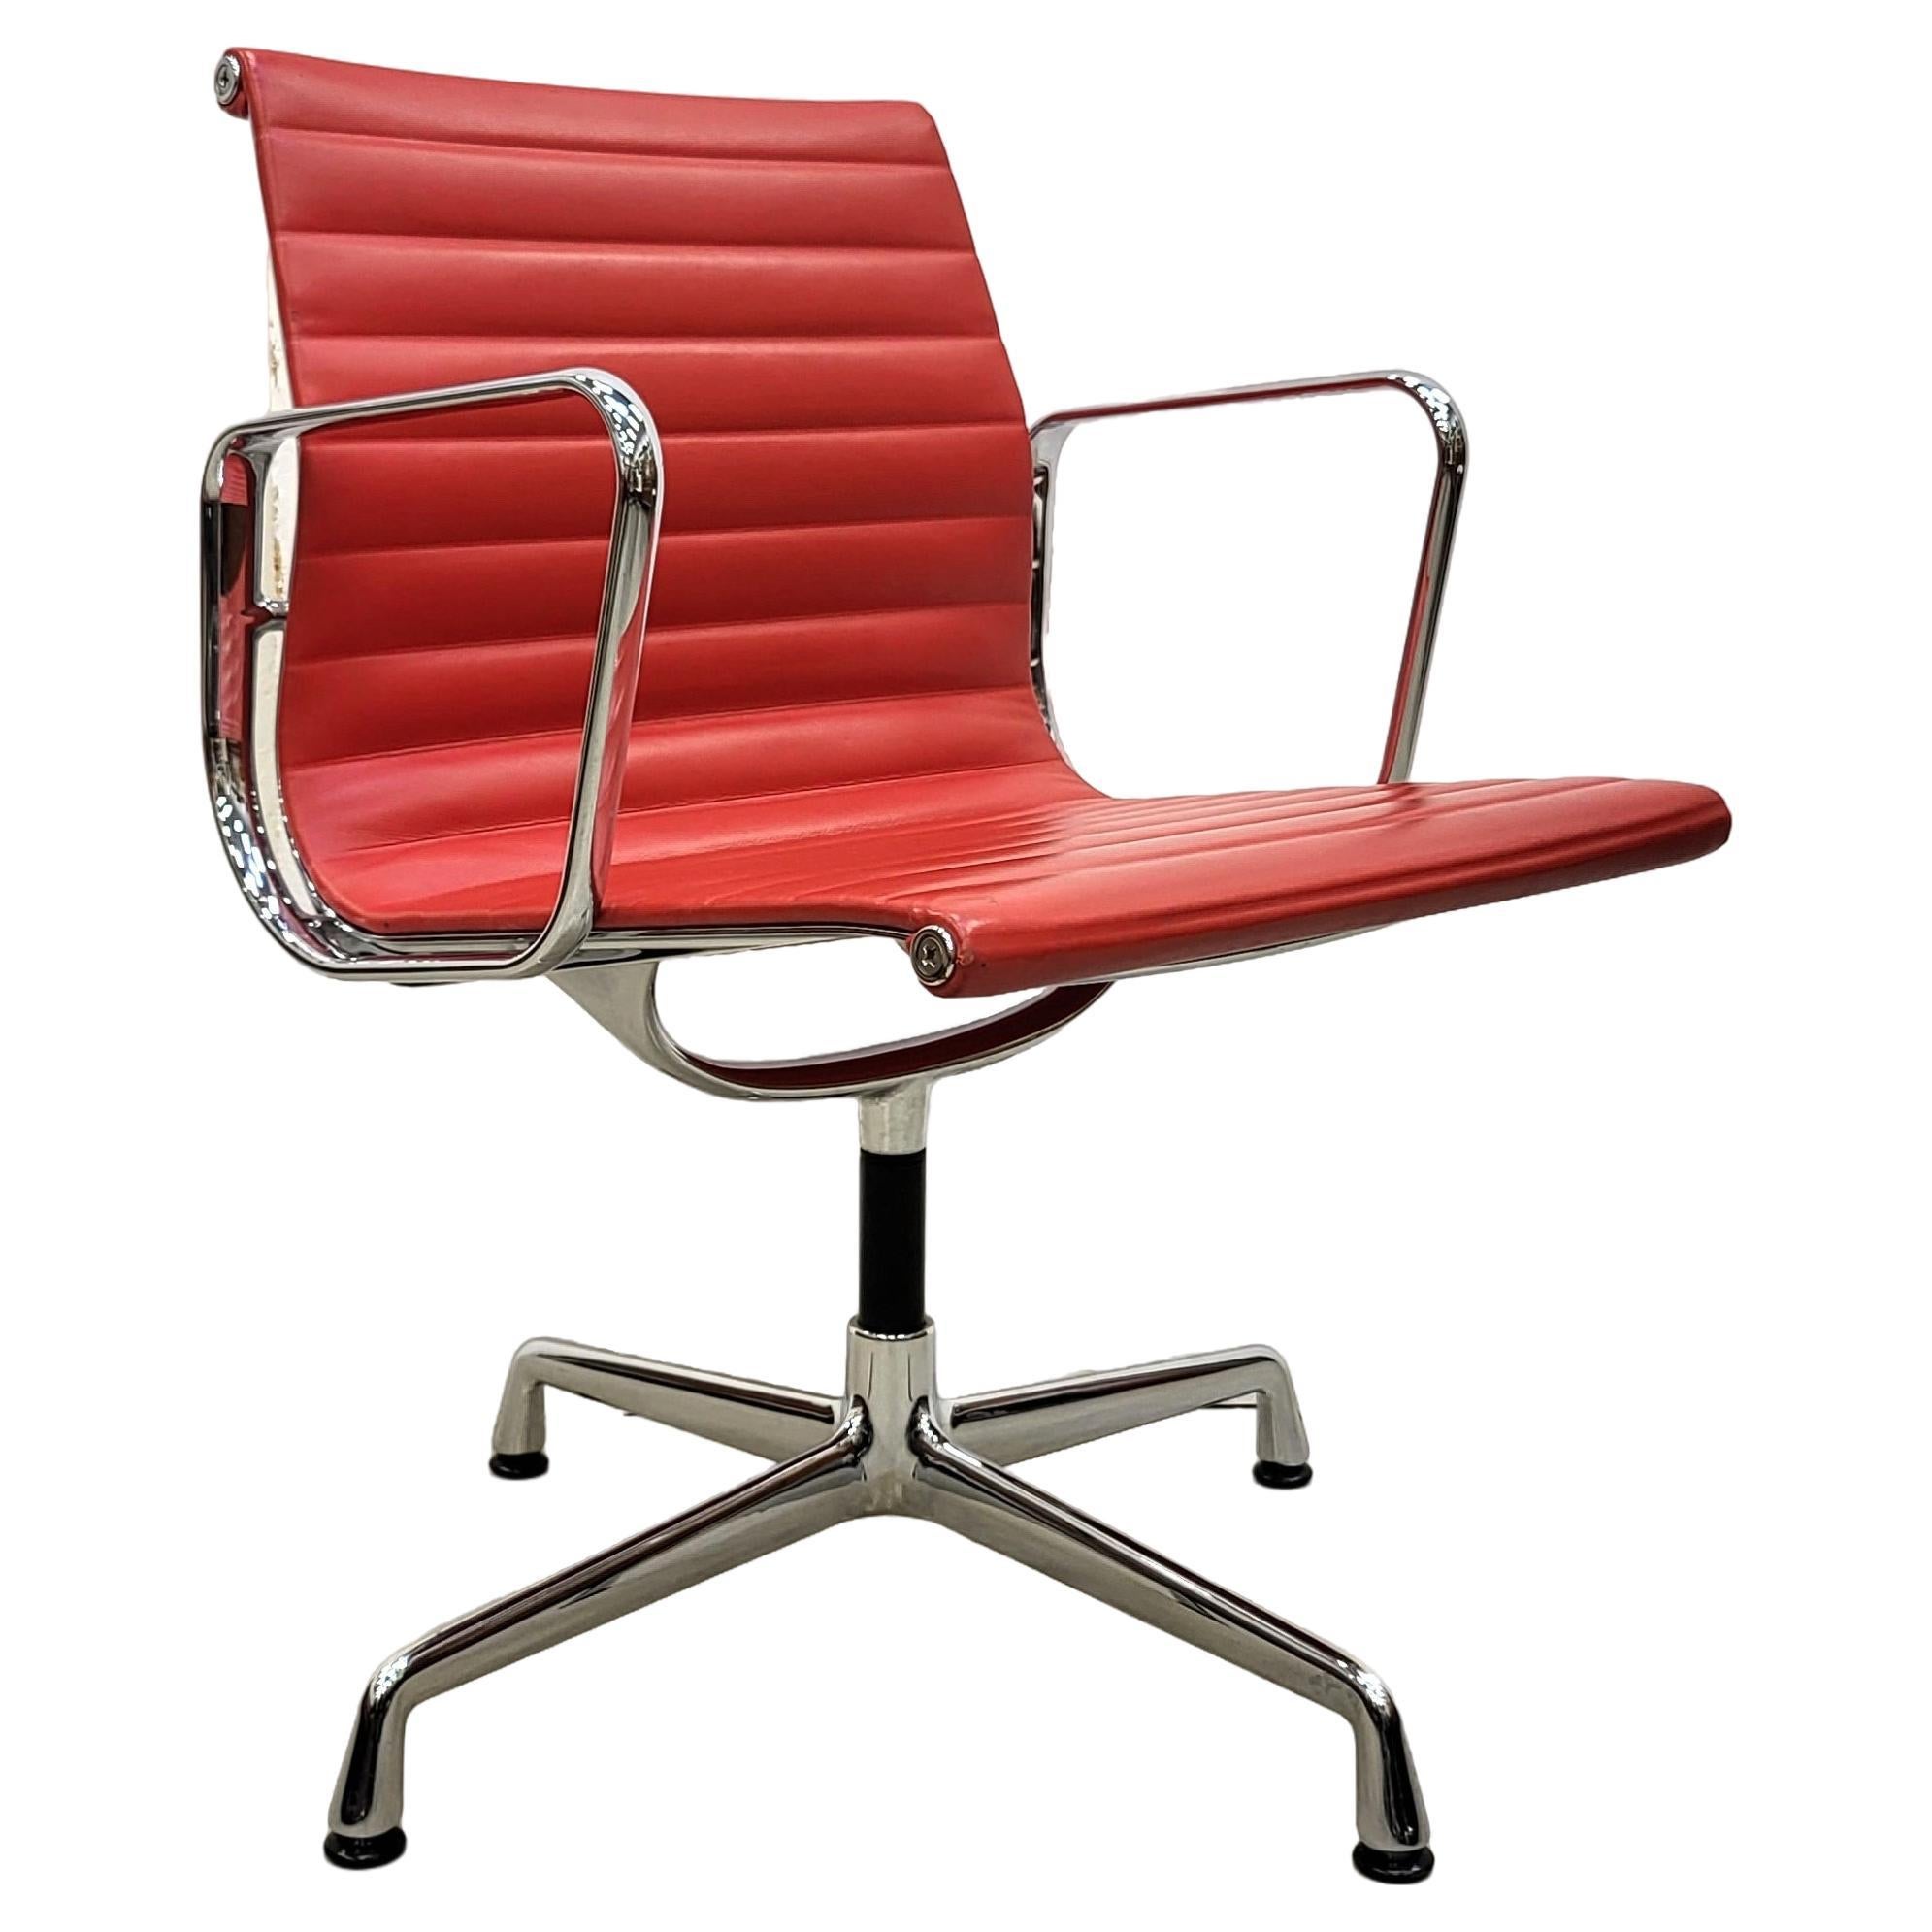 Vitra Ea108 Aluminium Chair by Charles Eames Red Leather, Set of 4